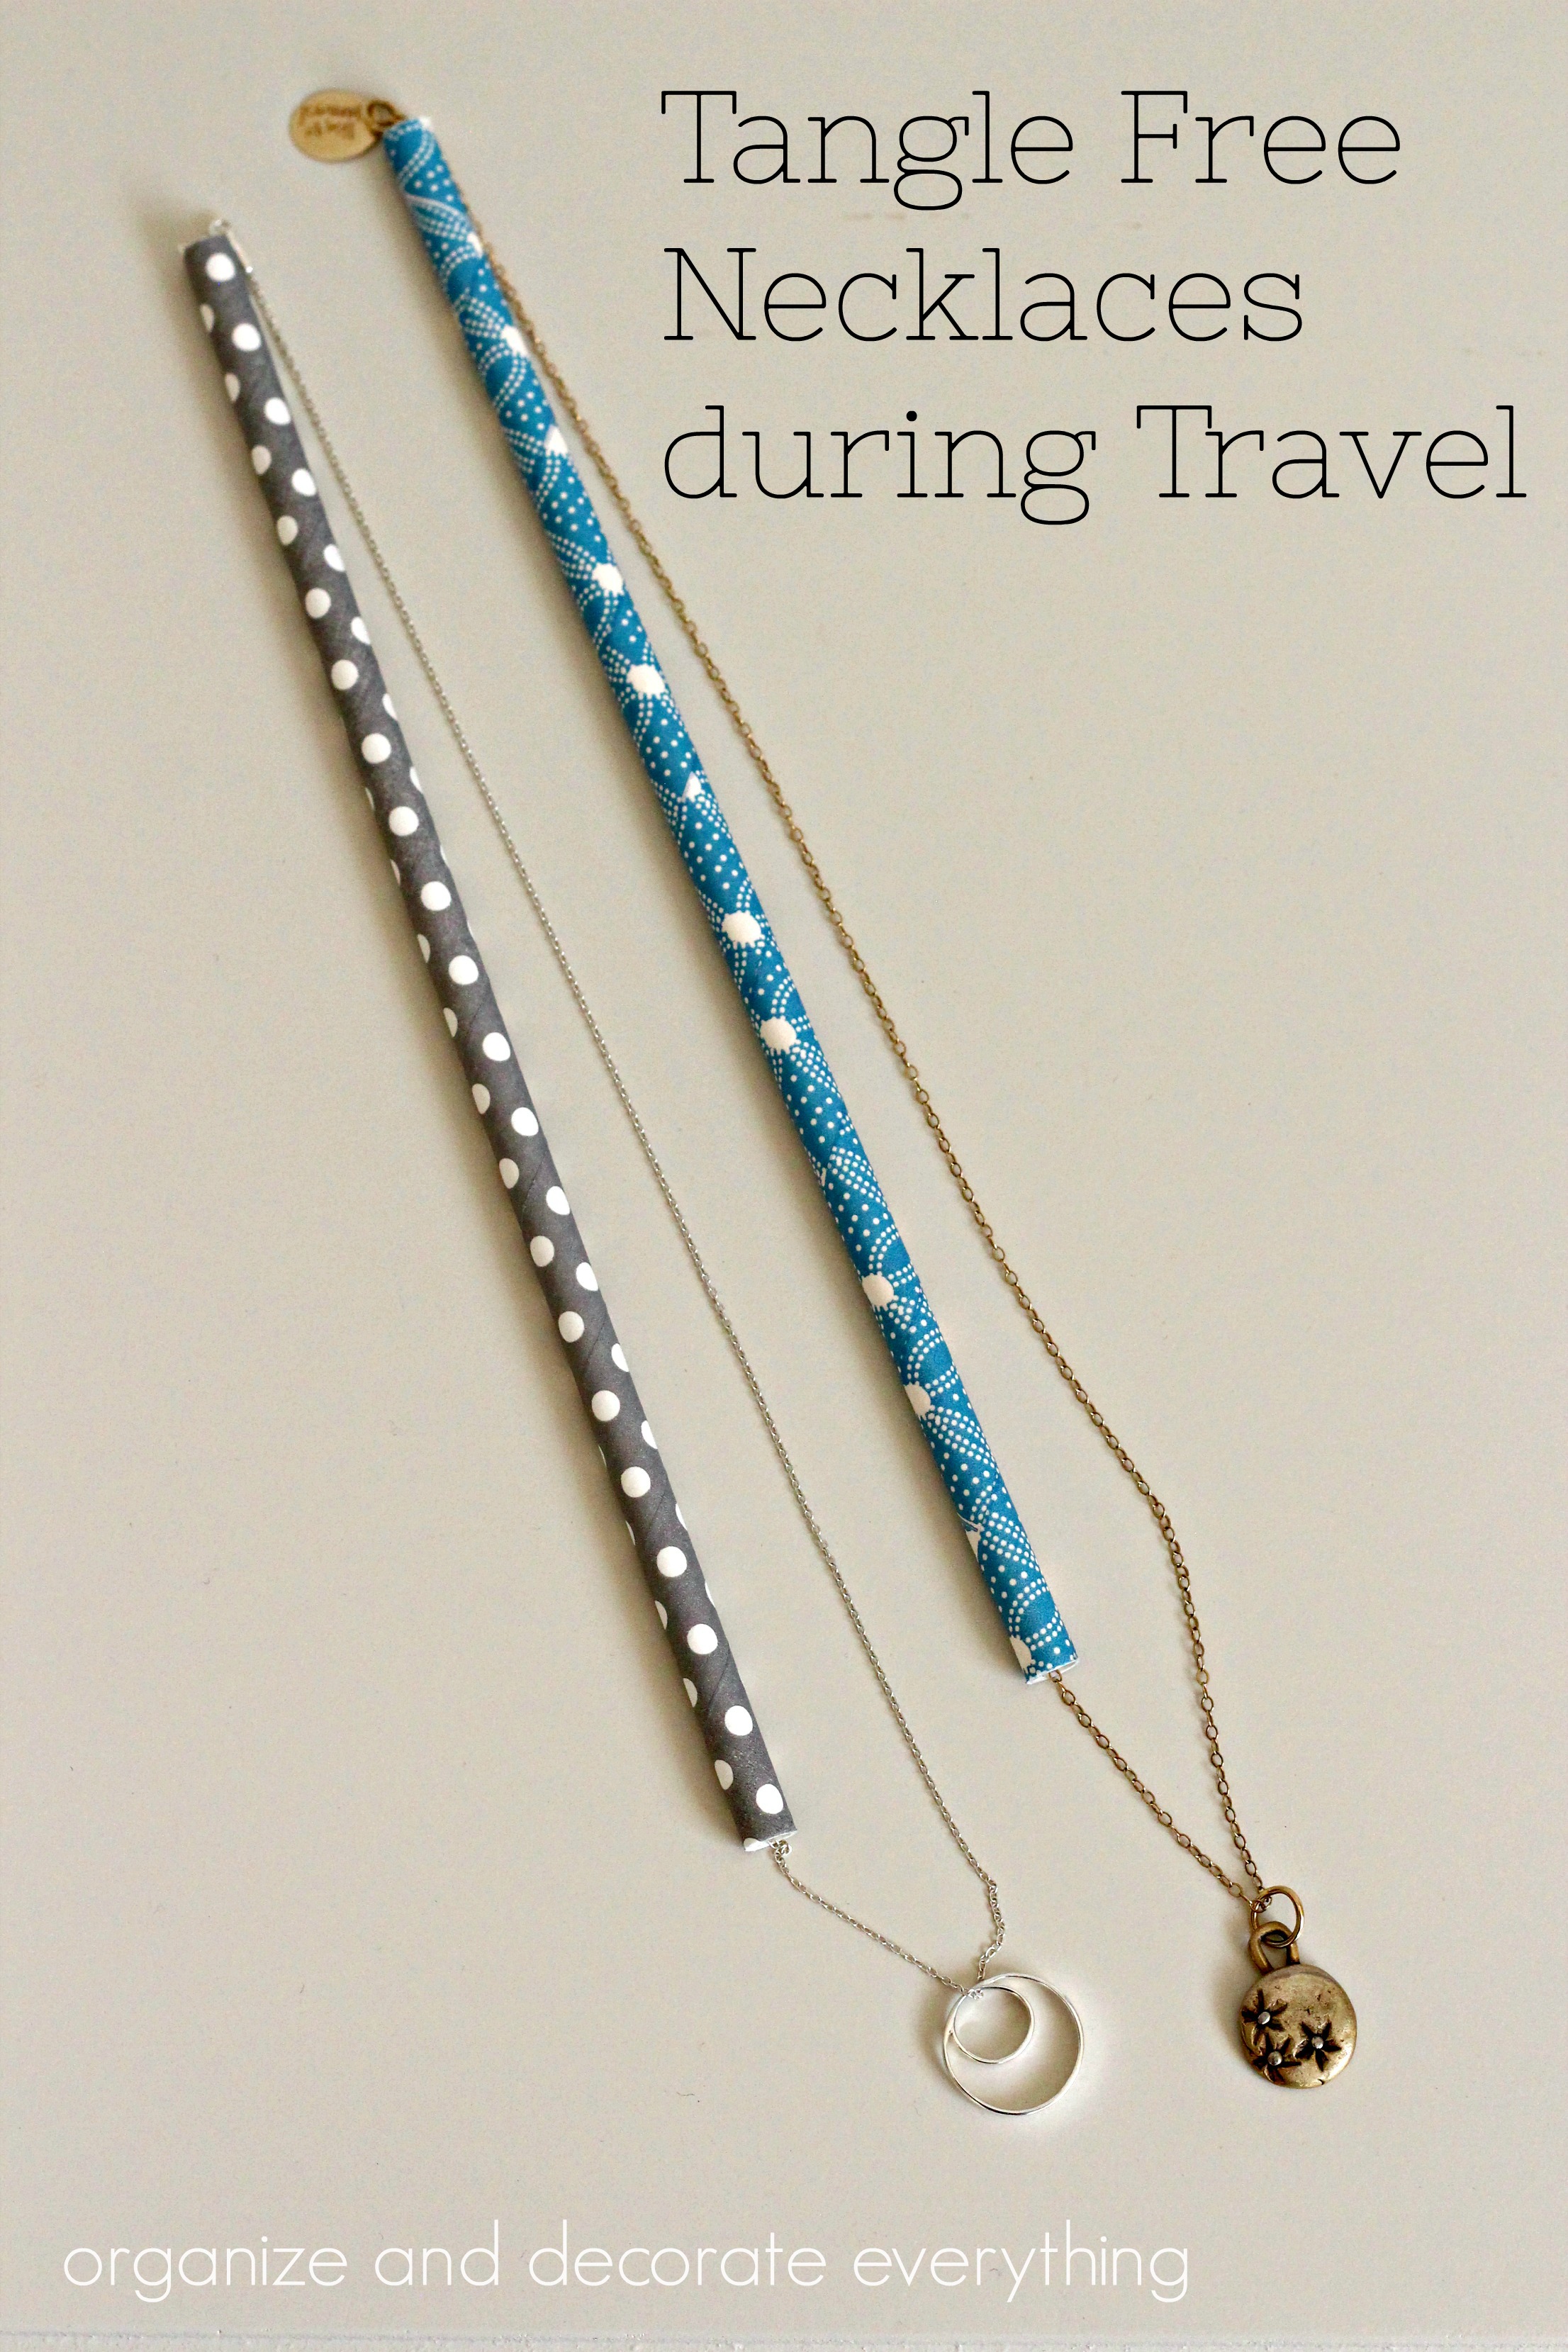 JEWELRY TIP: Use a straw to prevent necklaces from tangling.